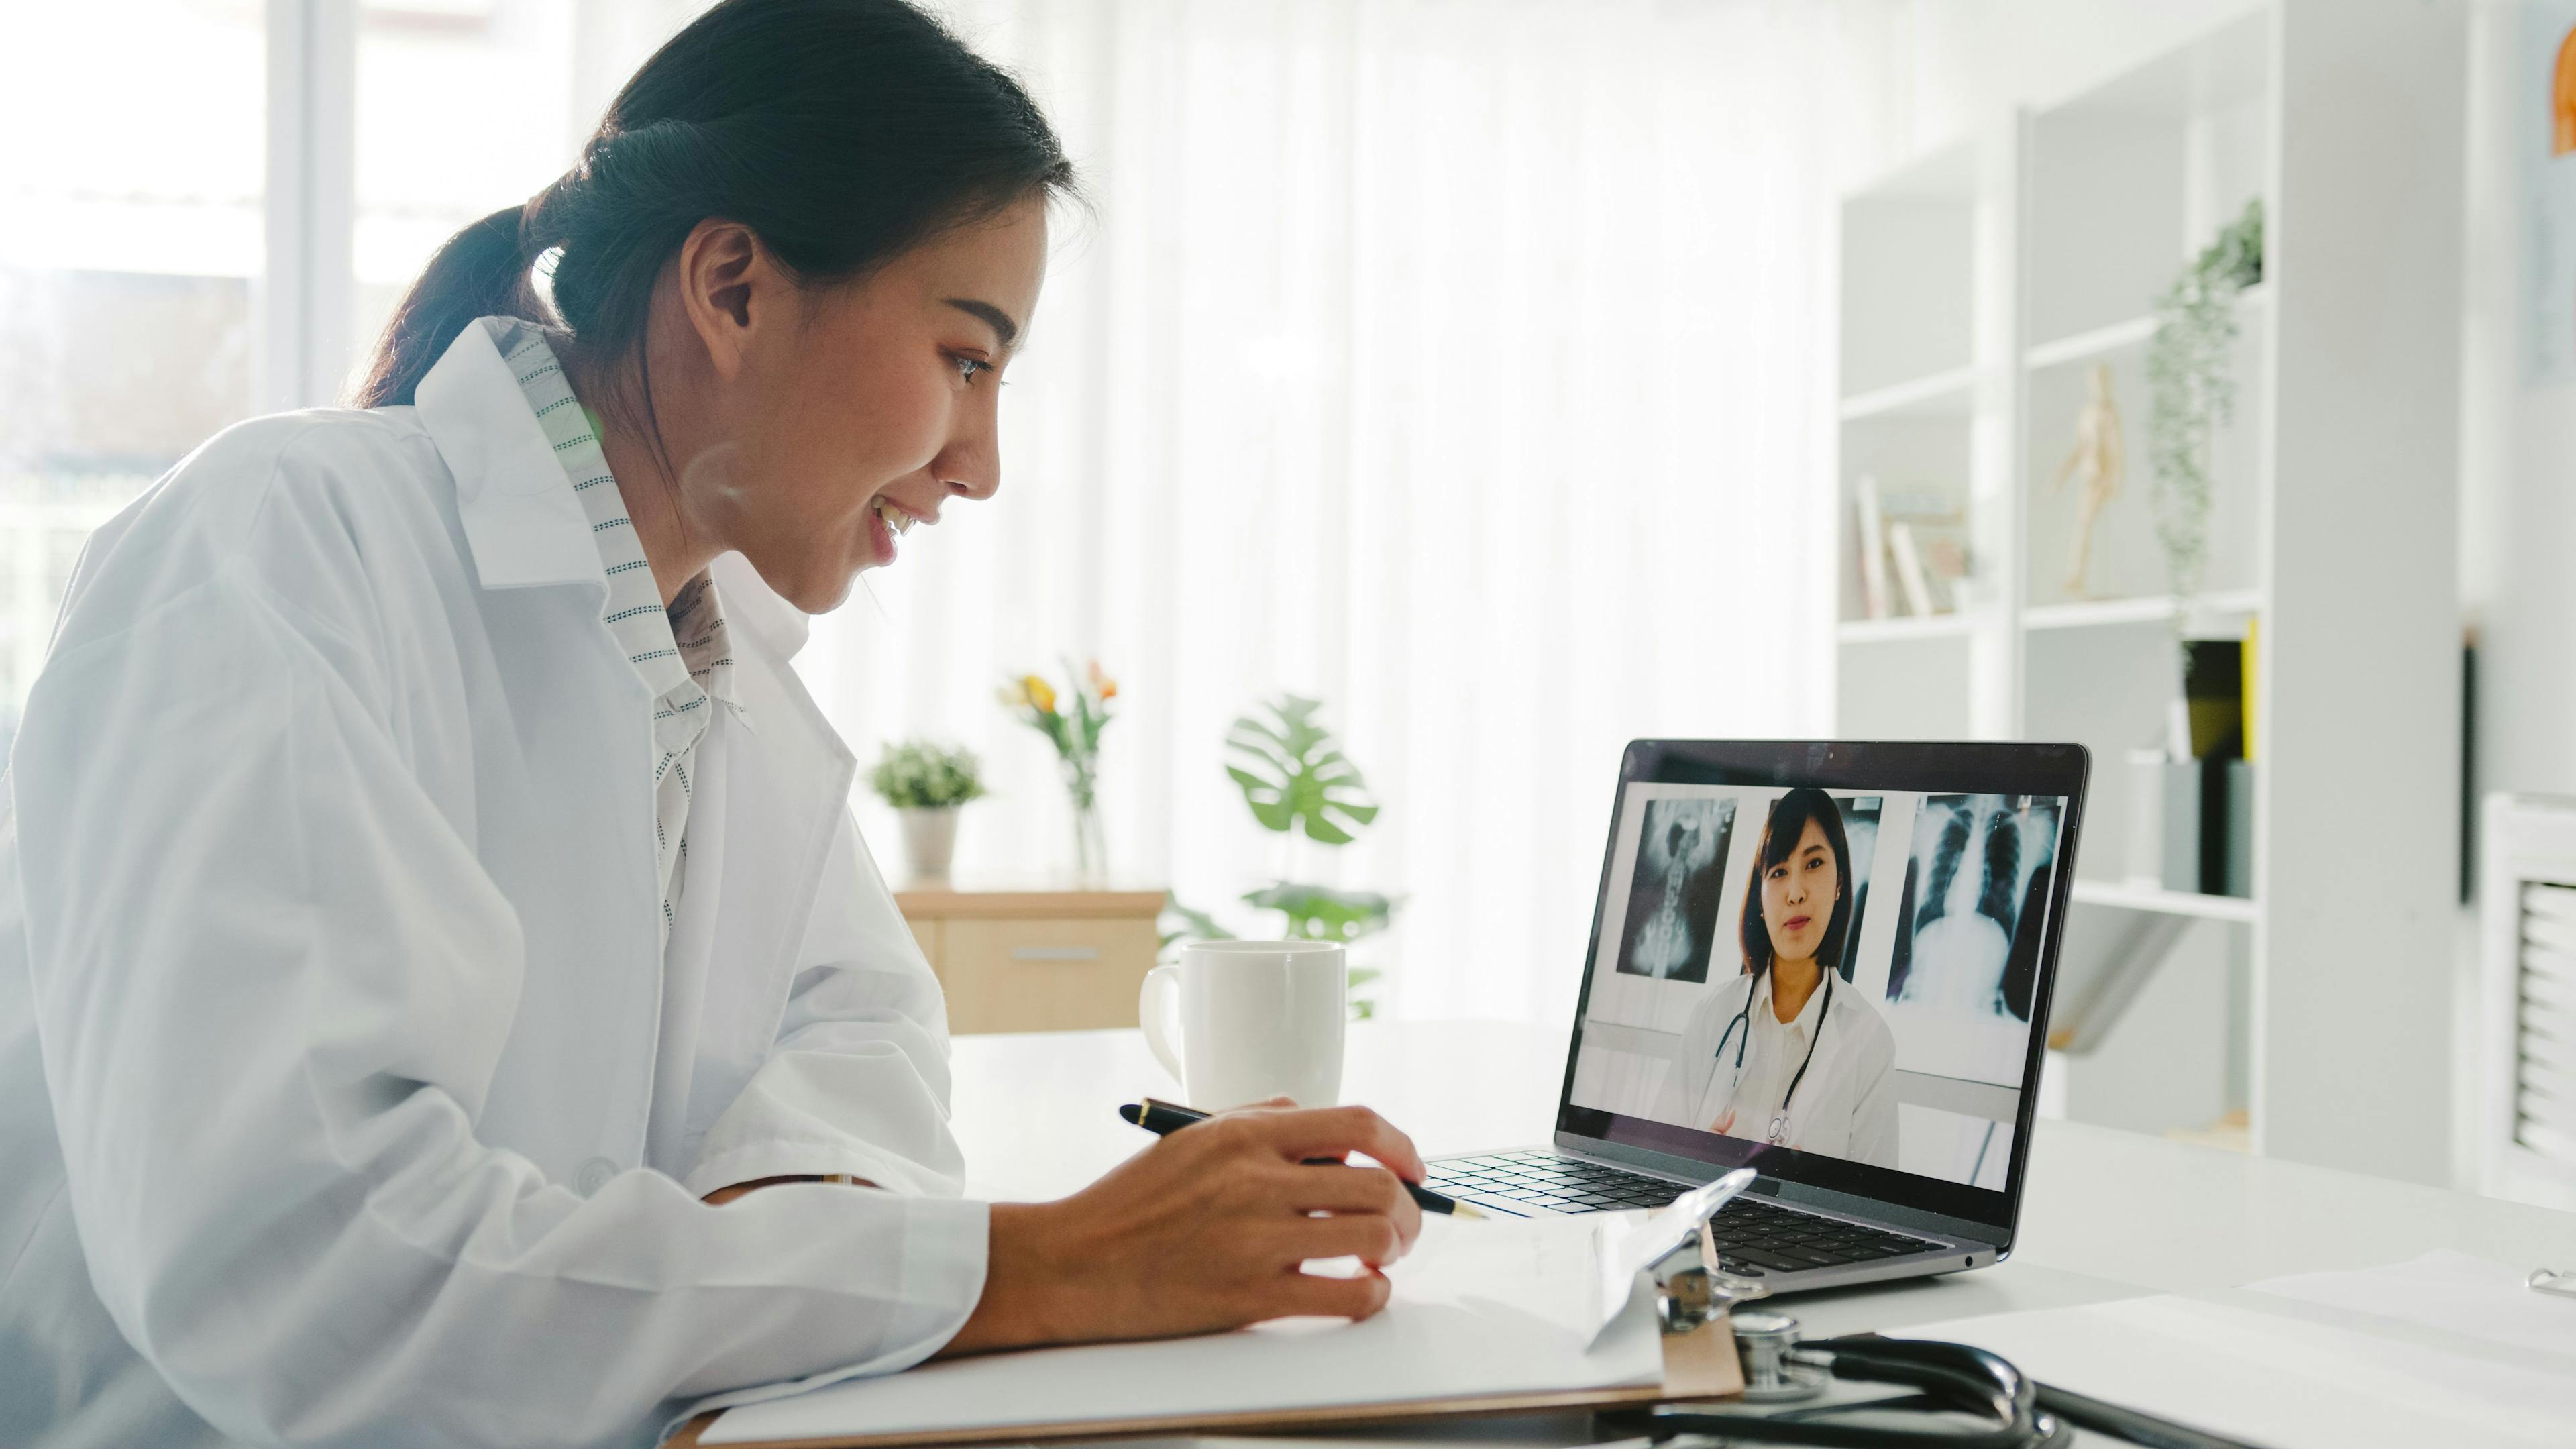 Doctors share their experiences with telepsychiatry in an academic department of psychiatry that led to significant expansion of clinical services and greater administrative efficiency.